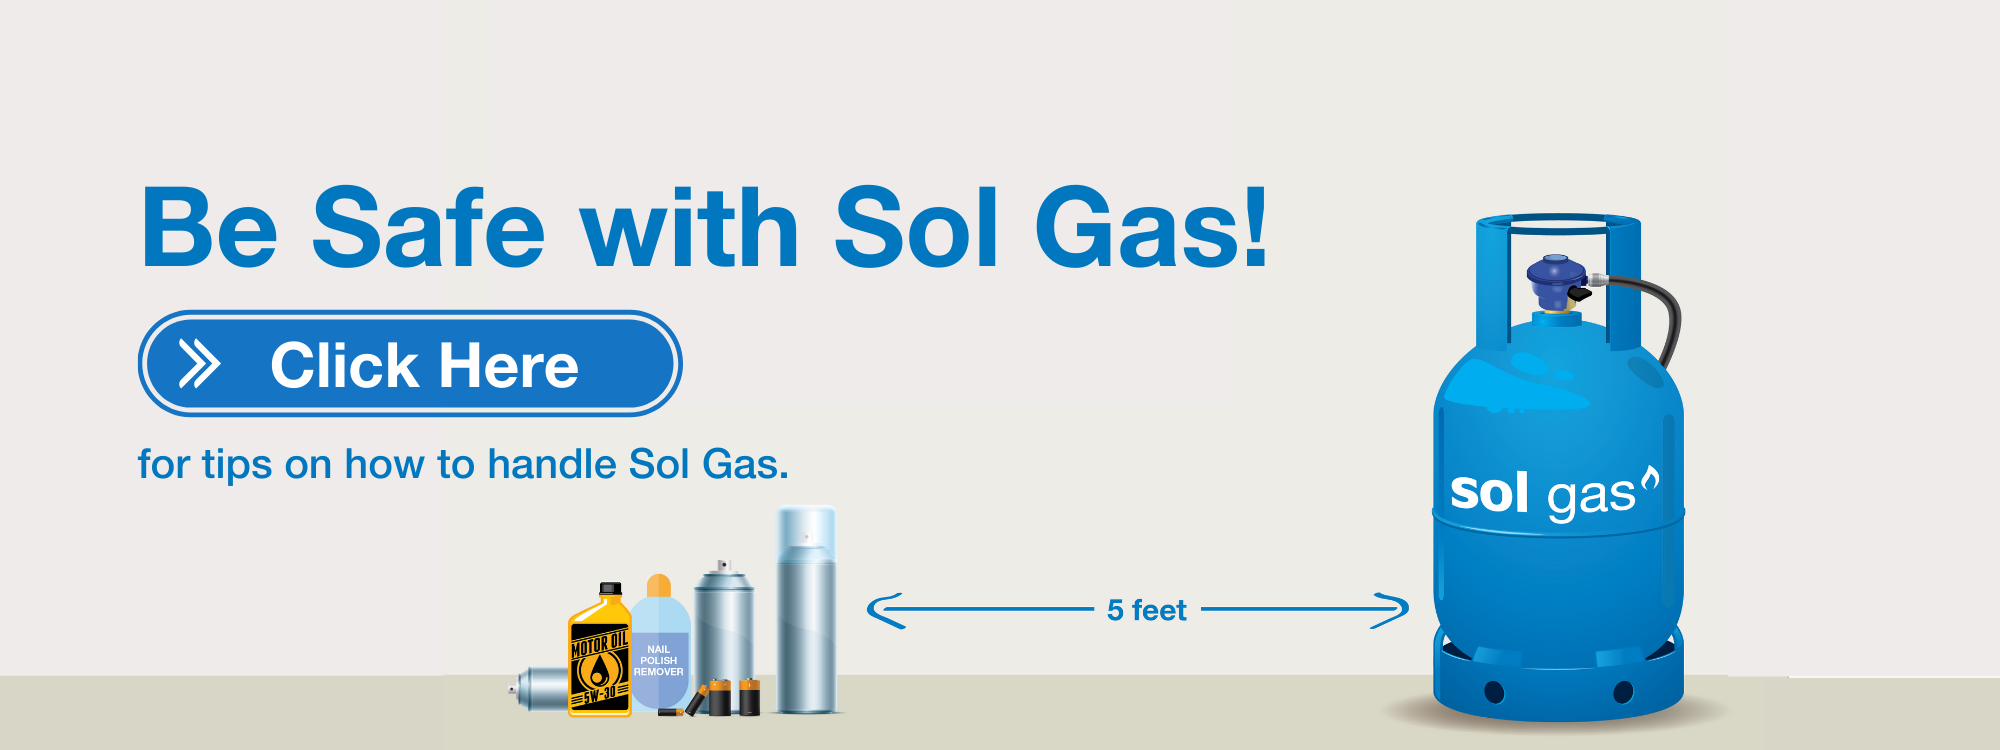 Be Safe With Sol Gas